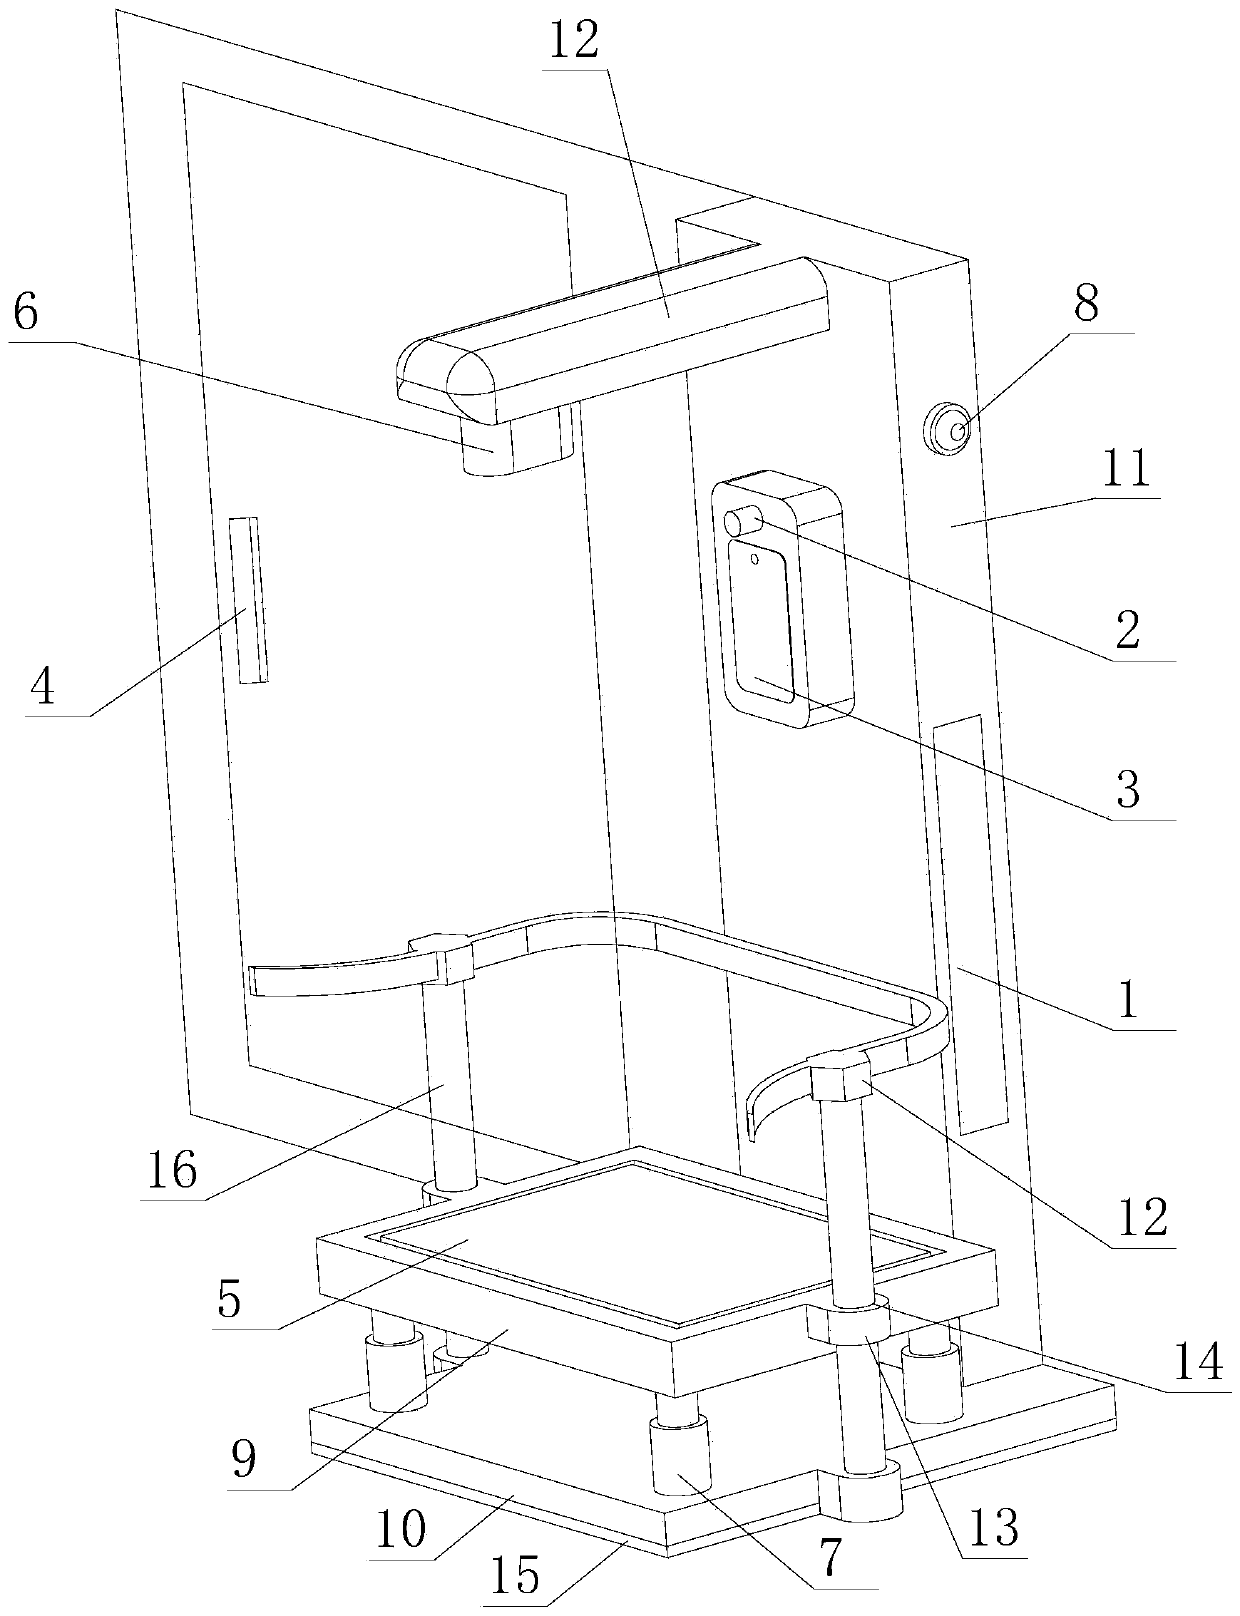 Face recognition access control system device for channel temperature measurement